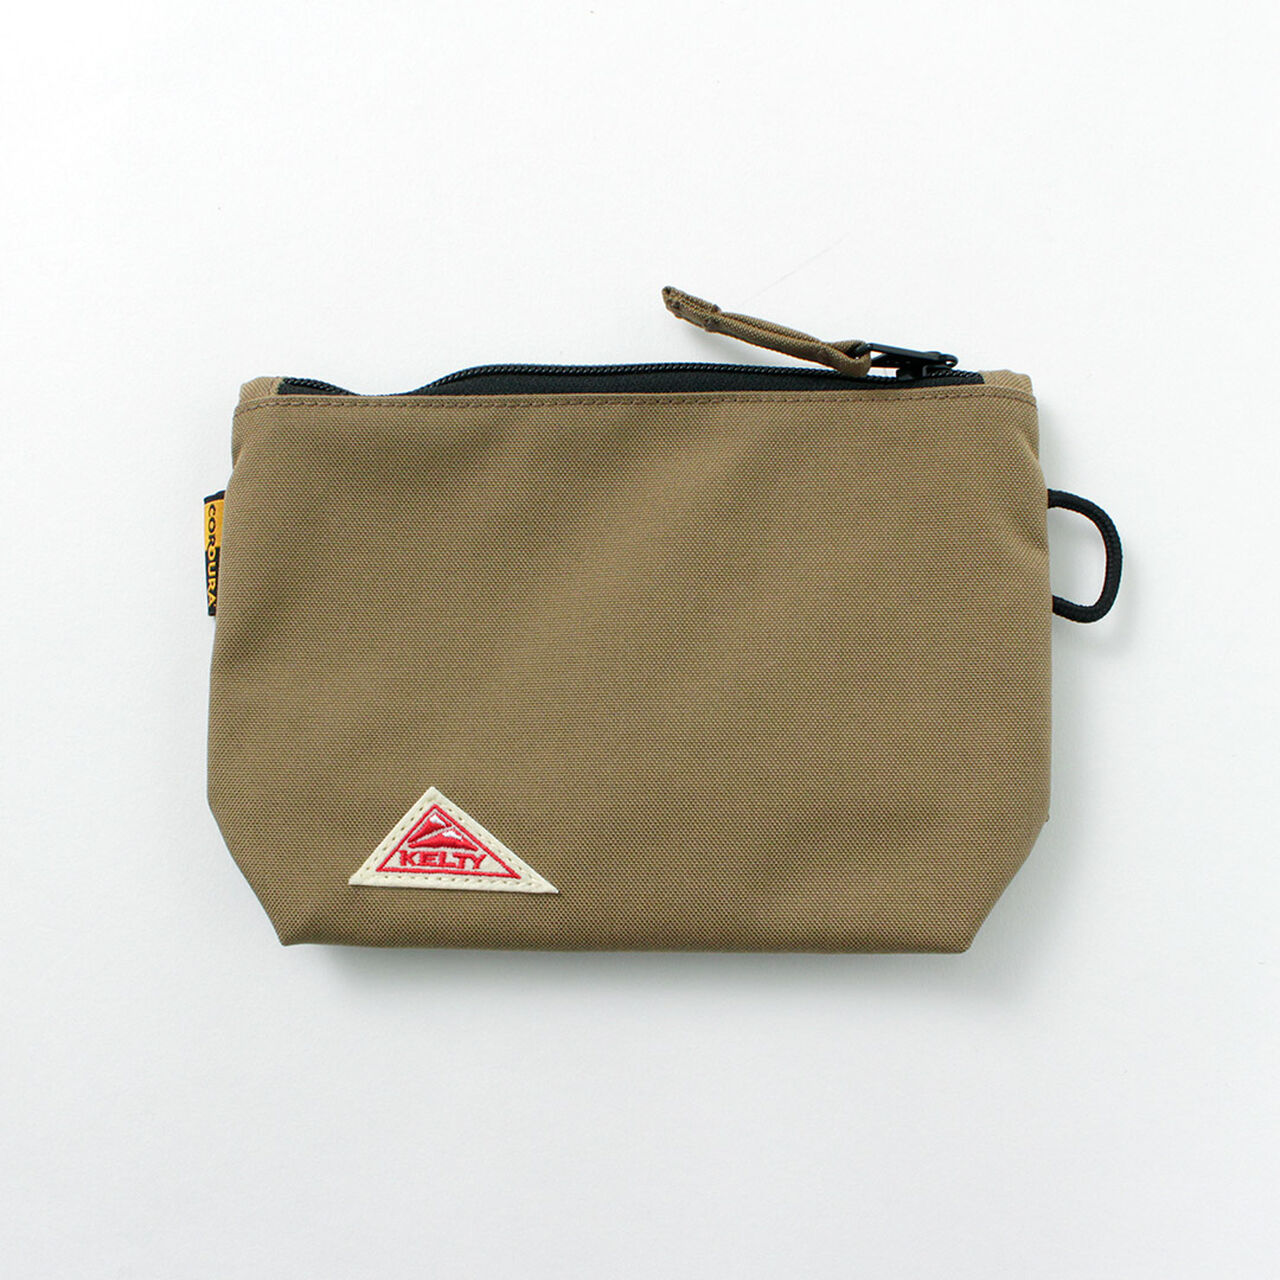 Handy Pouch 2,Mocha, large image number 0